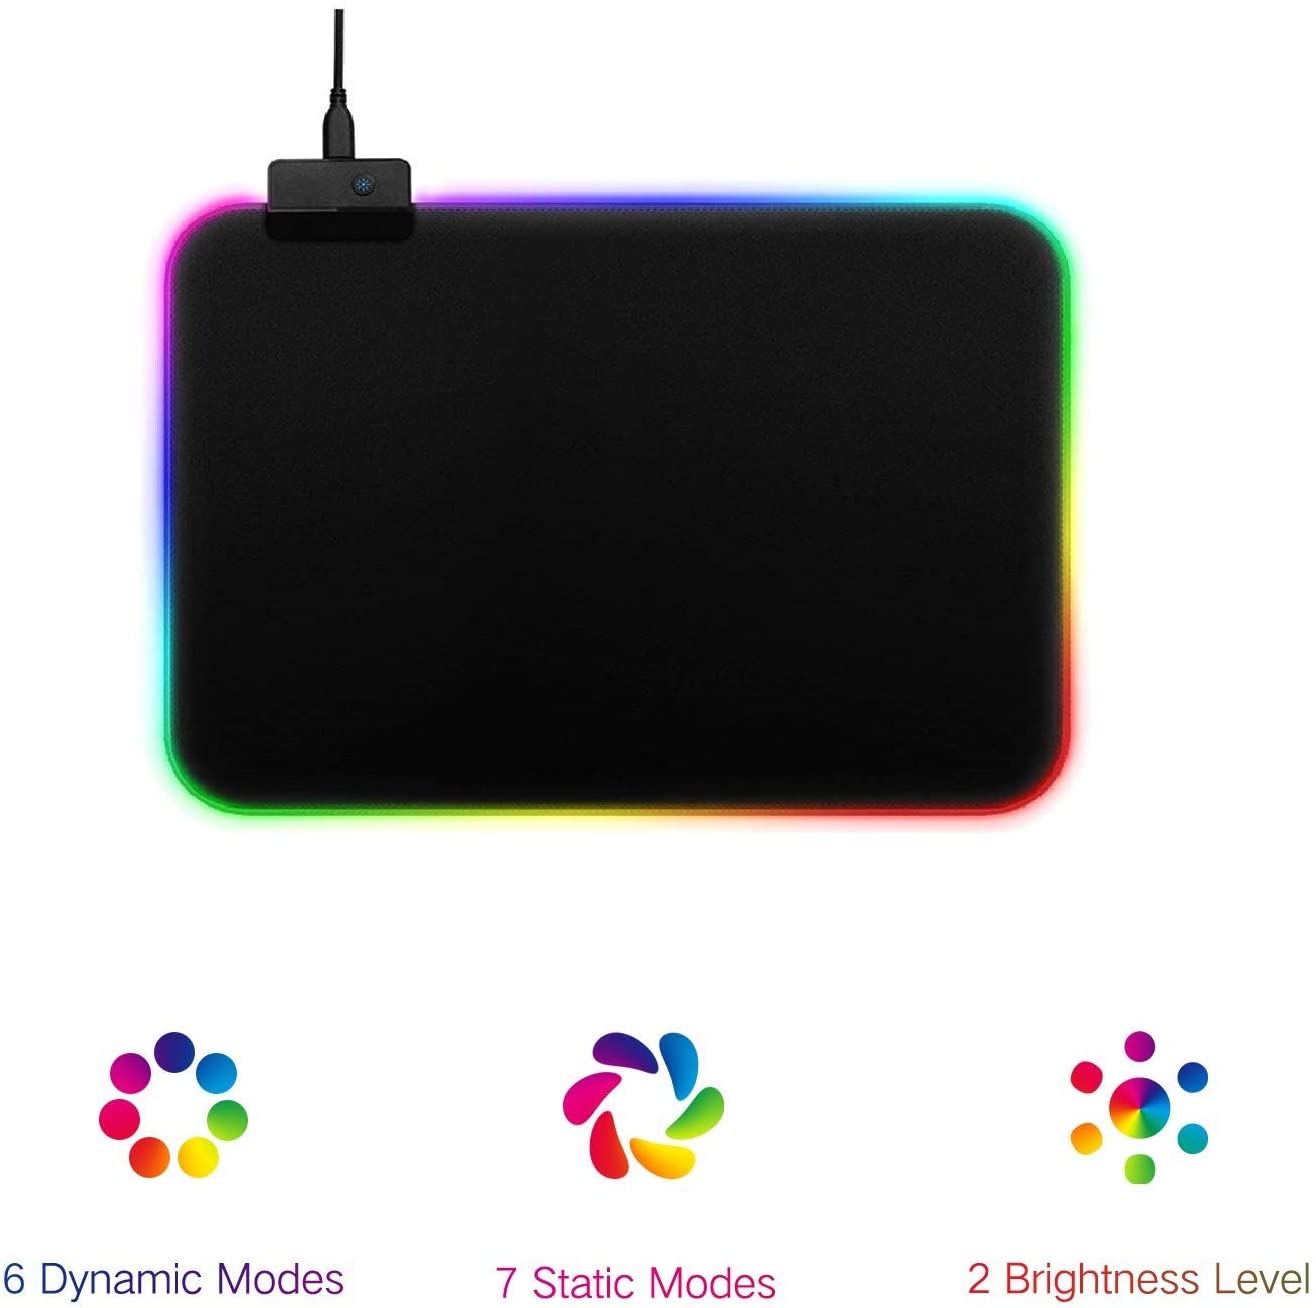 HF-IMMP04: Mouse Pad RGB, LED Lighting Effects Gaming Mice Pad Mat 14in*10in Non-Slip Rubber Base